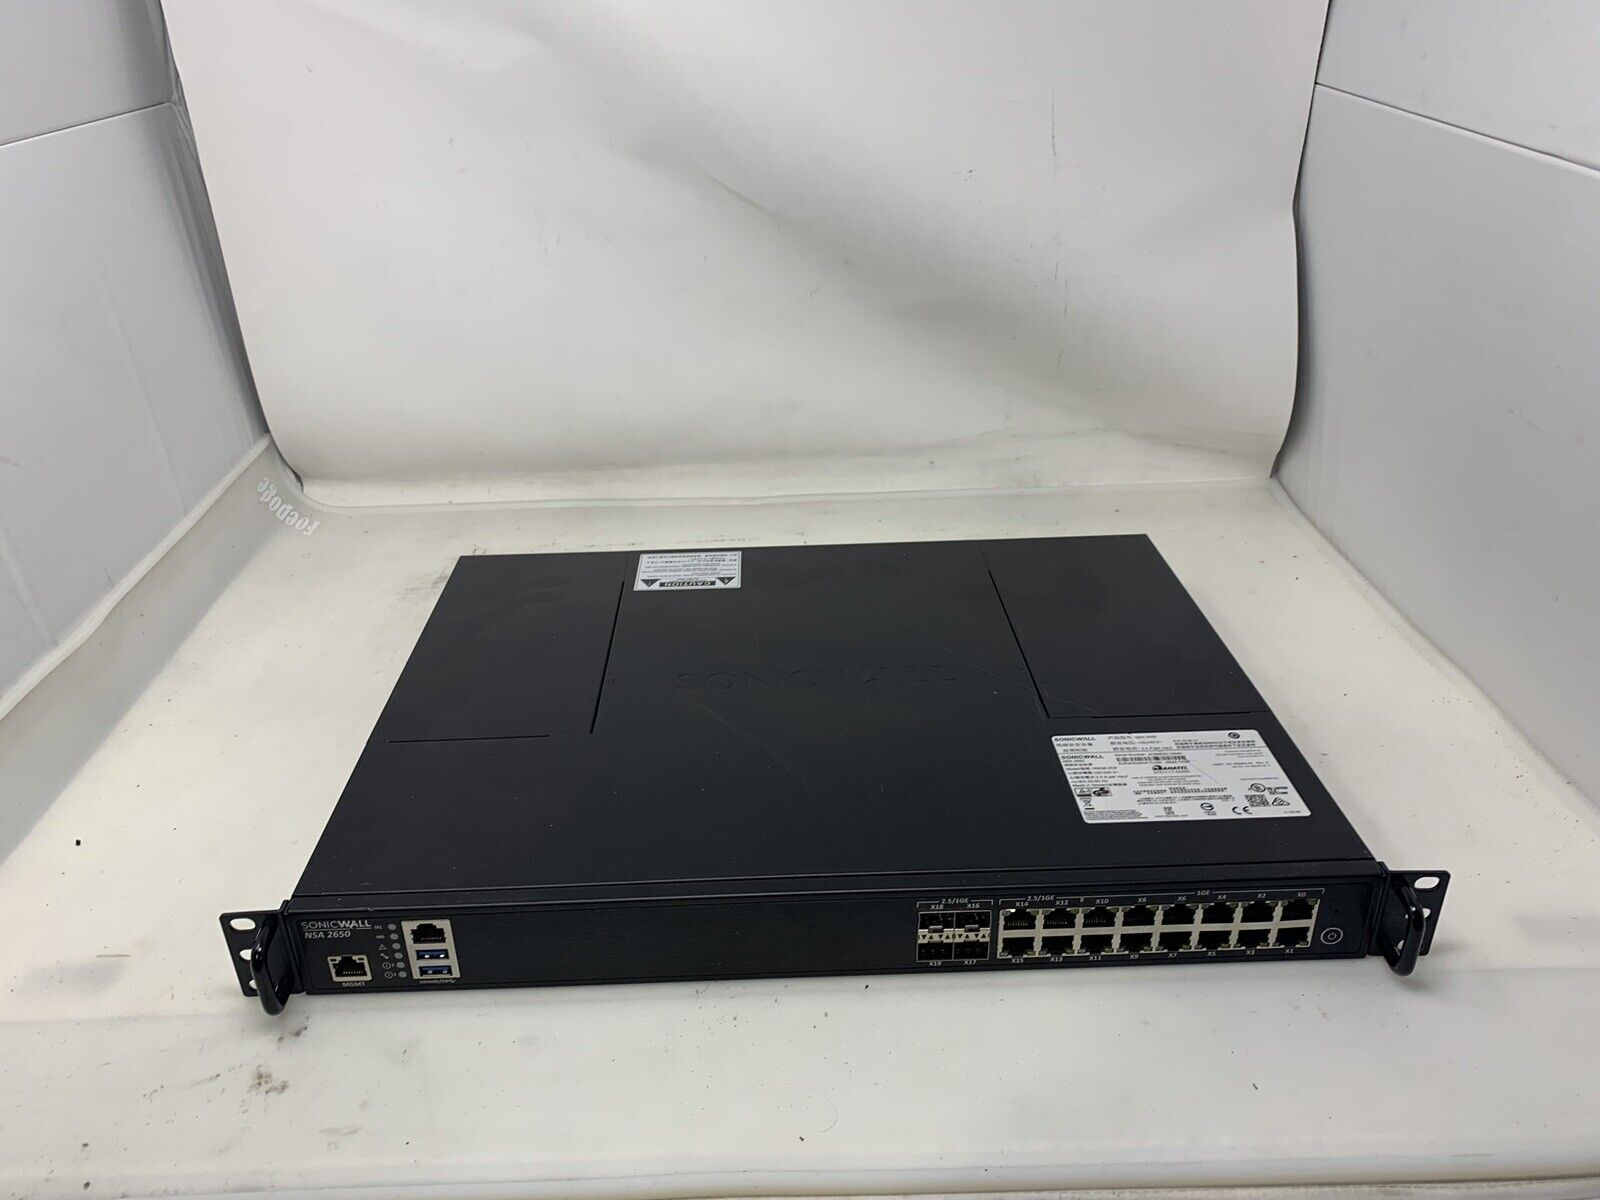 SonicWall NSA 2650 16-Port 1RK38-0C8 Network Security Appliance 40324F2